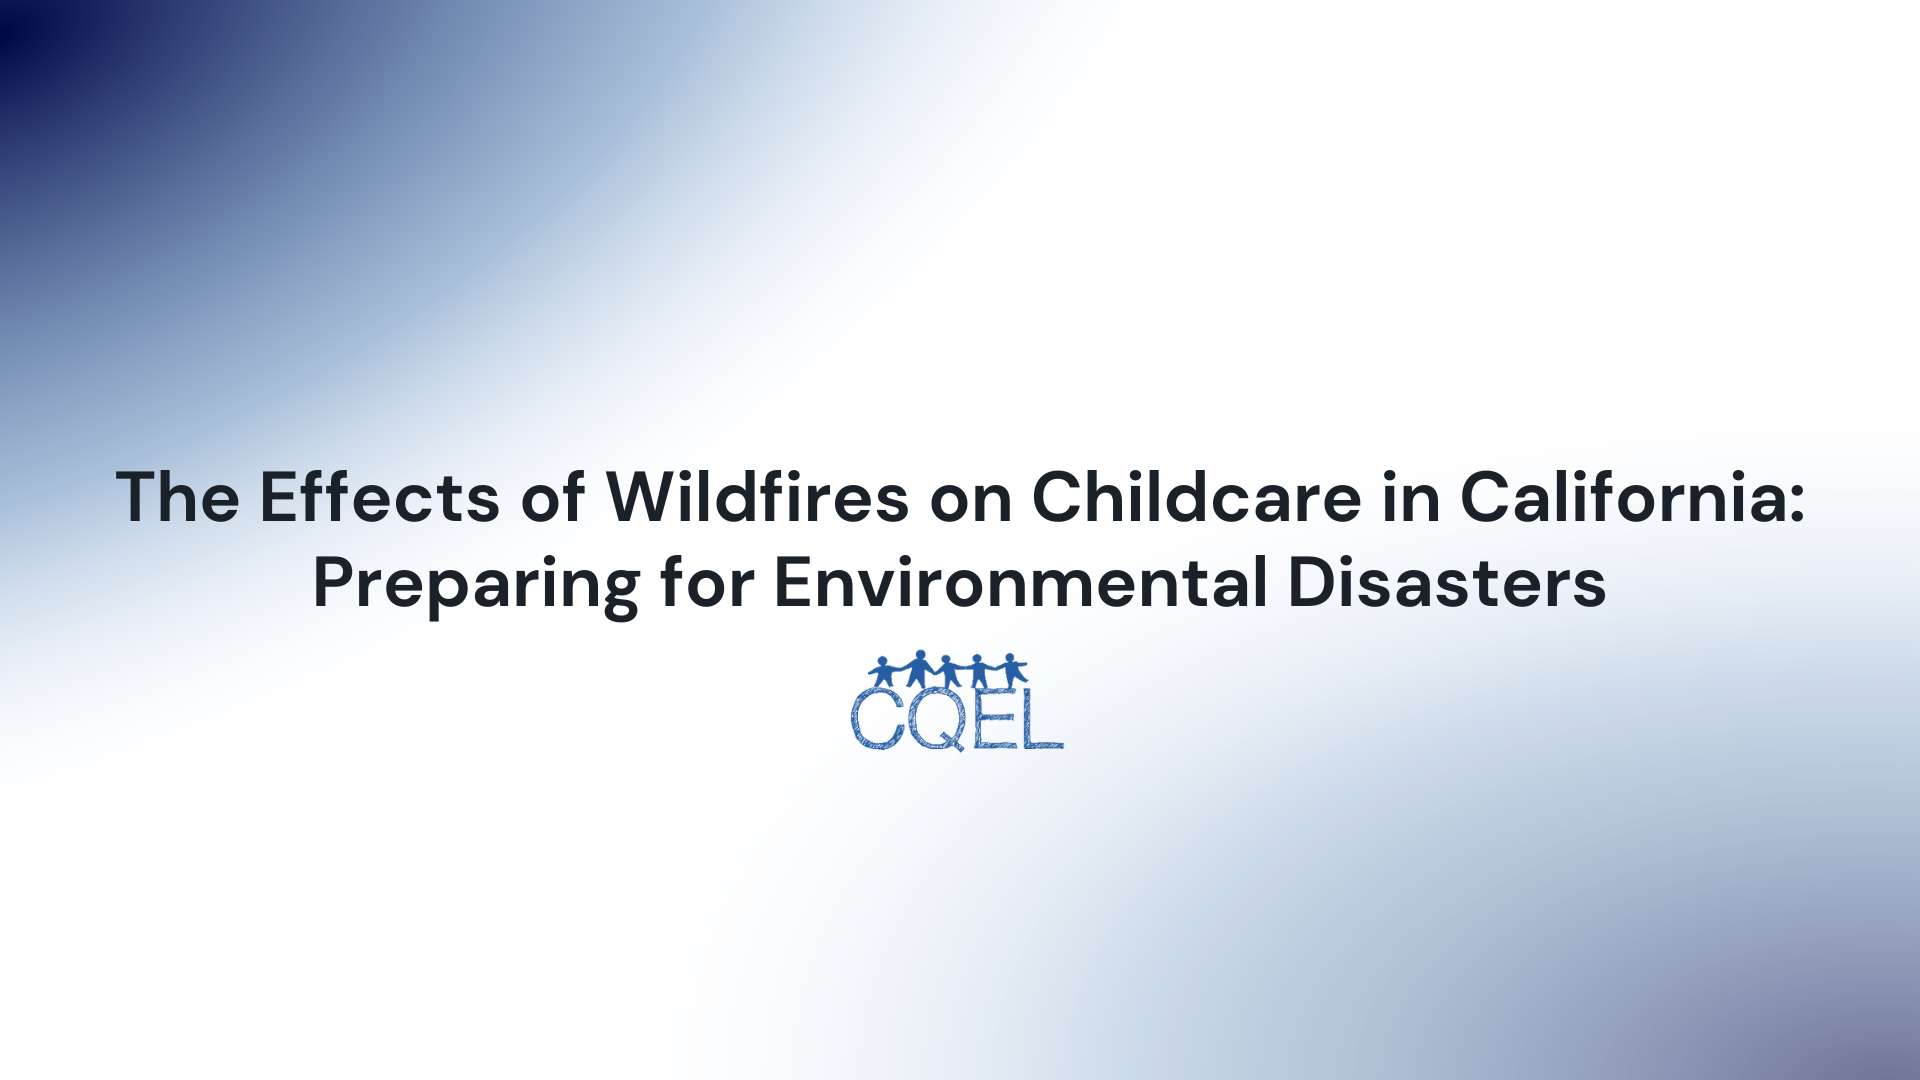 The Effects of Wildfires on Childcare in California: Preparing for Environmental Disasters